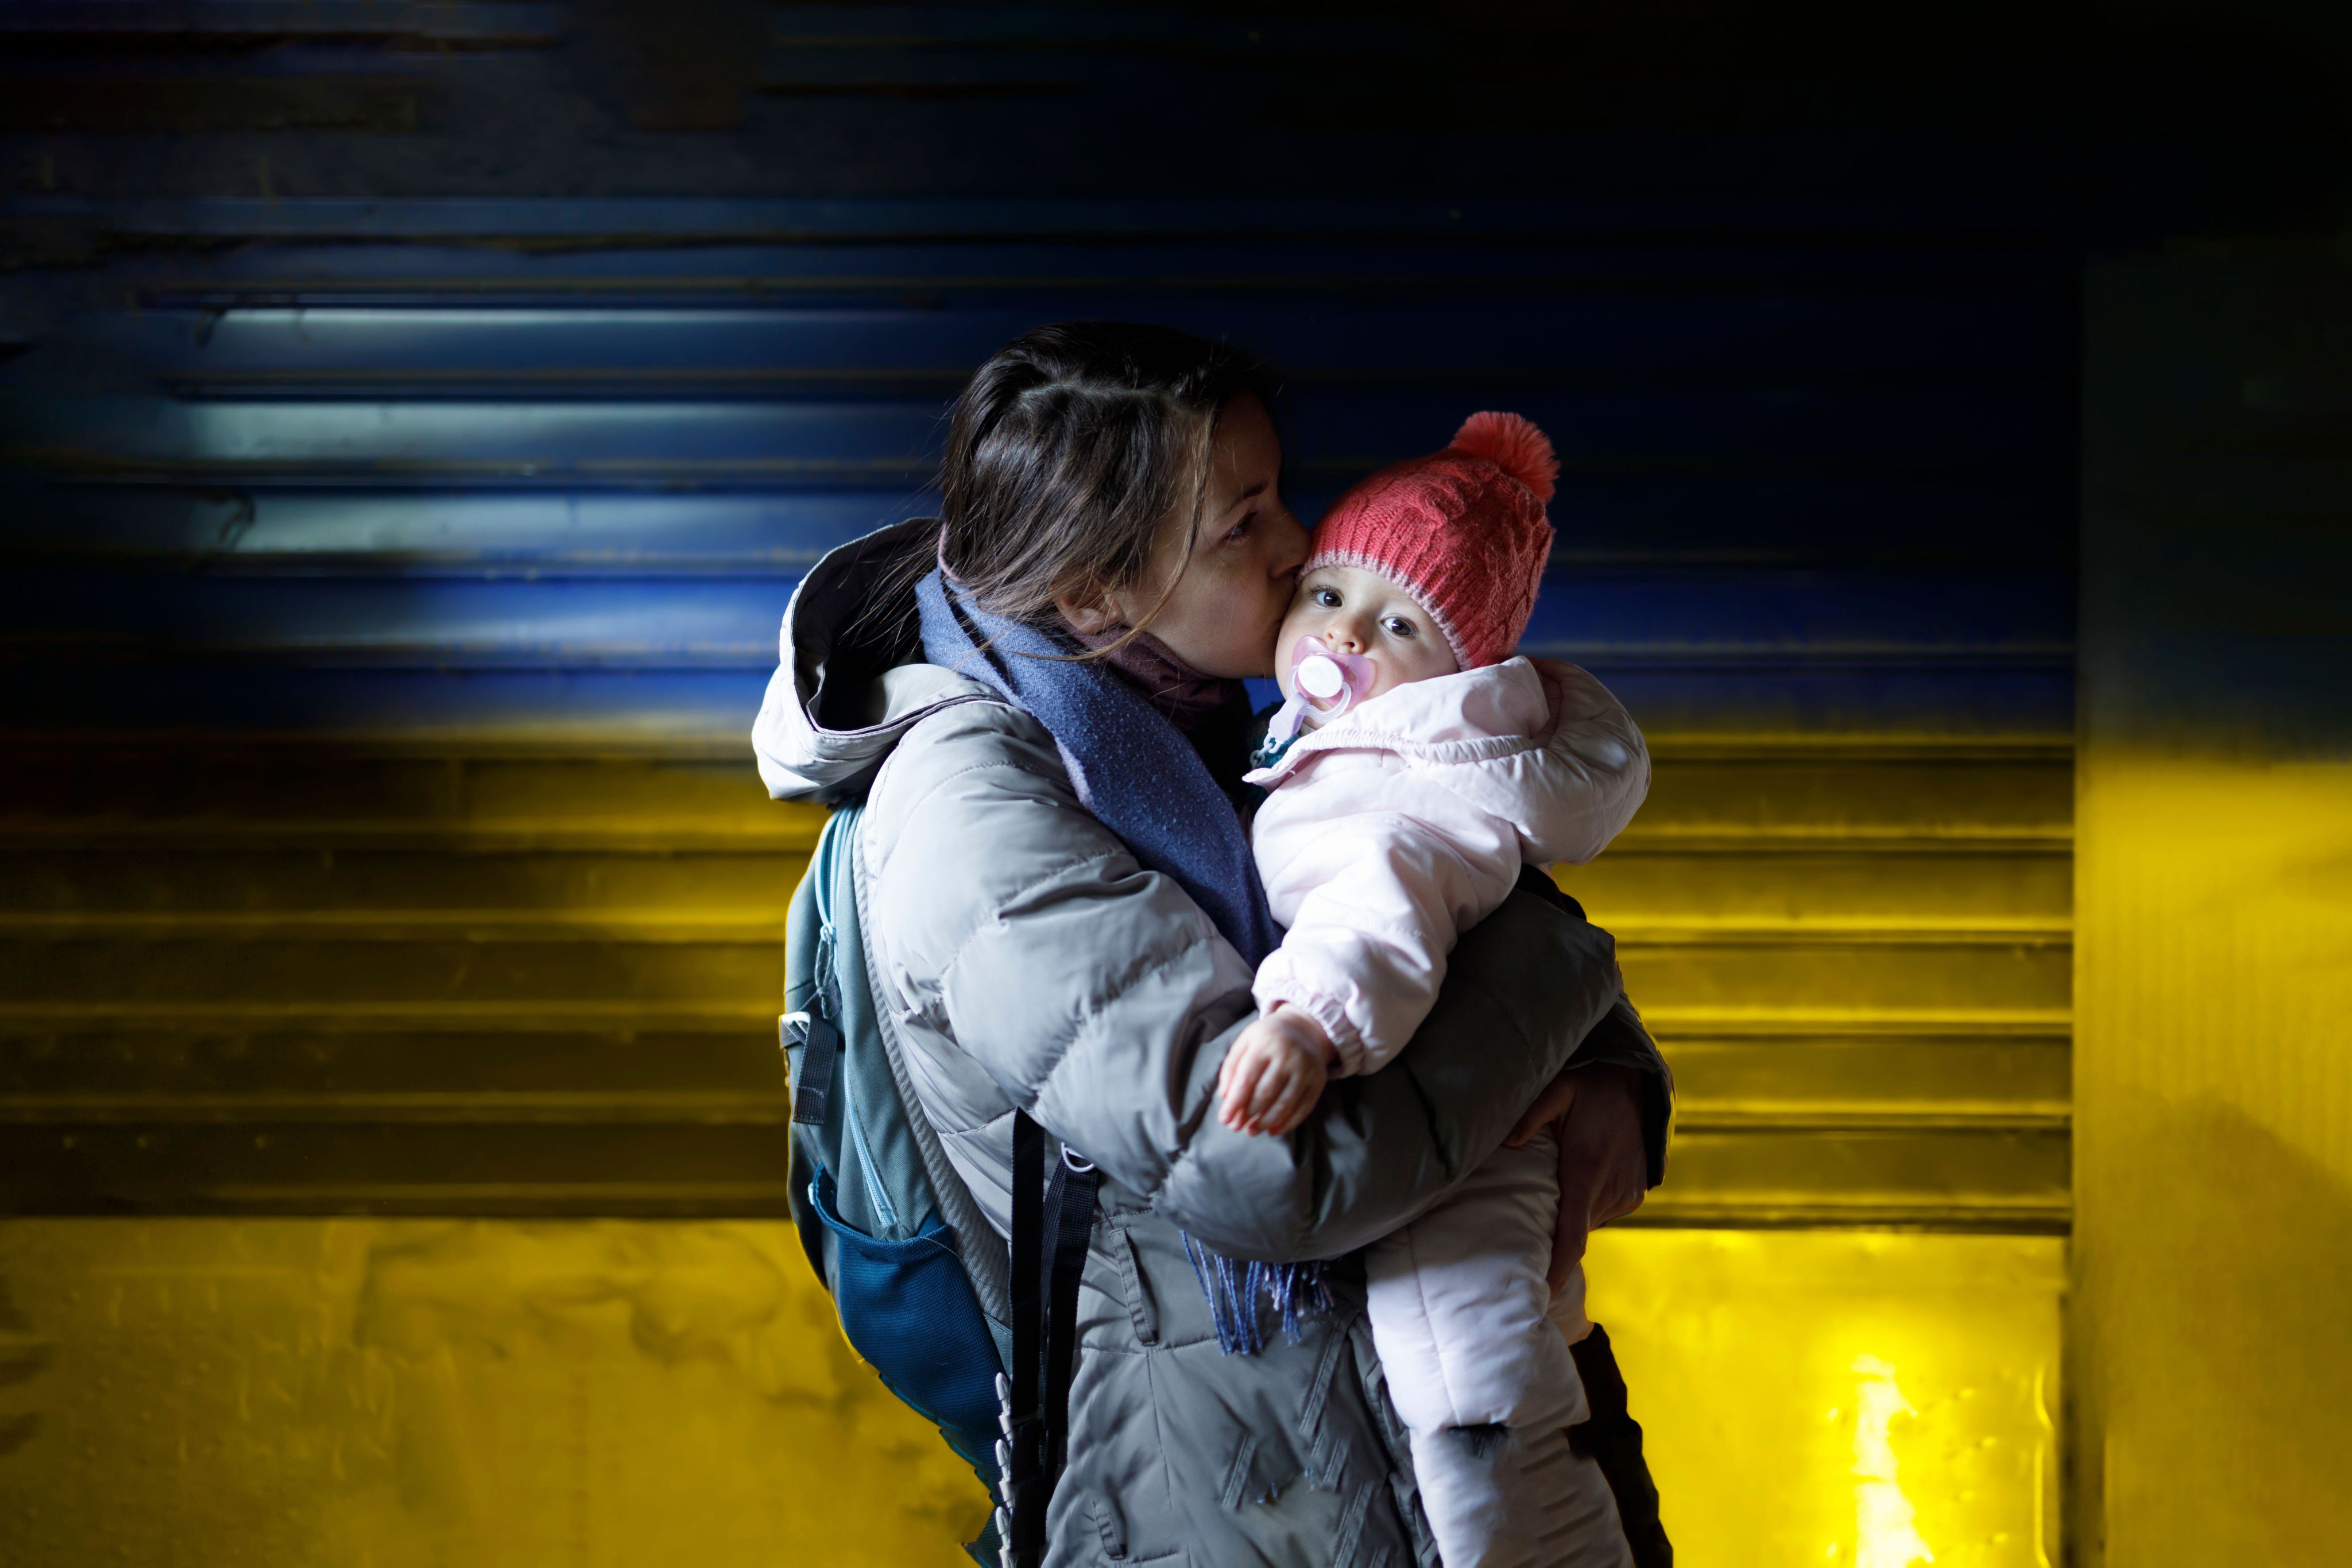 A mother holding her young child in a bomb shelter in Ukraine